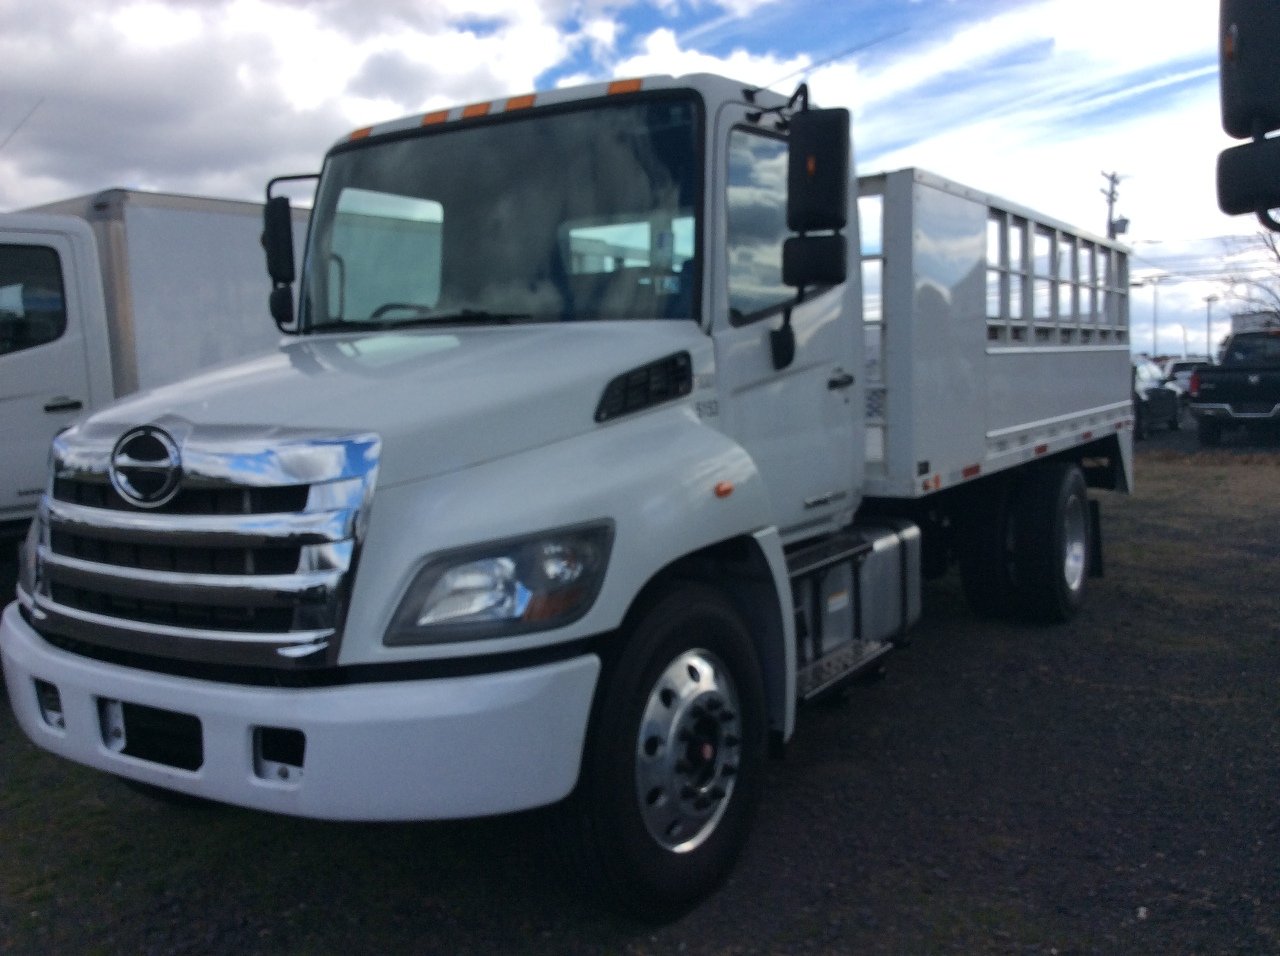 Used Truck Inventory - 1001857 01 2 - 142